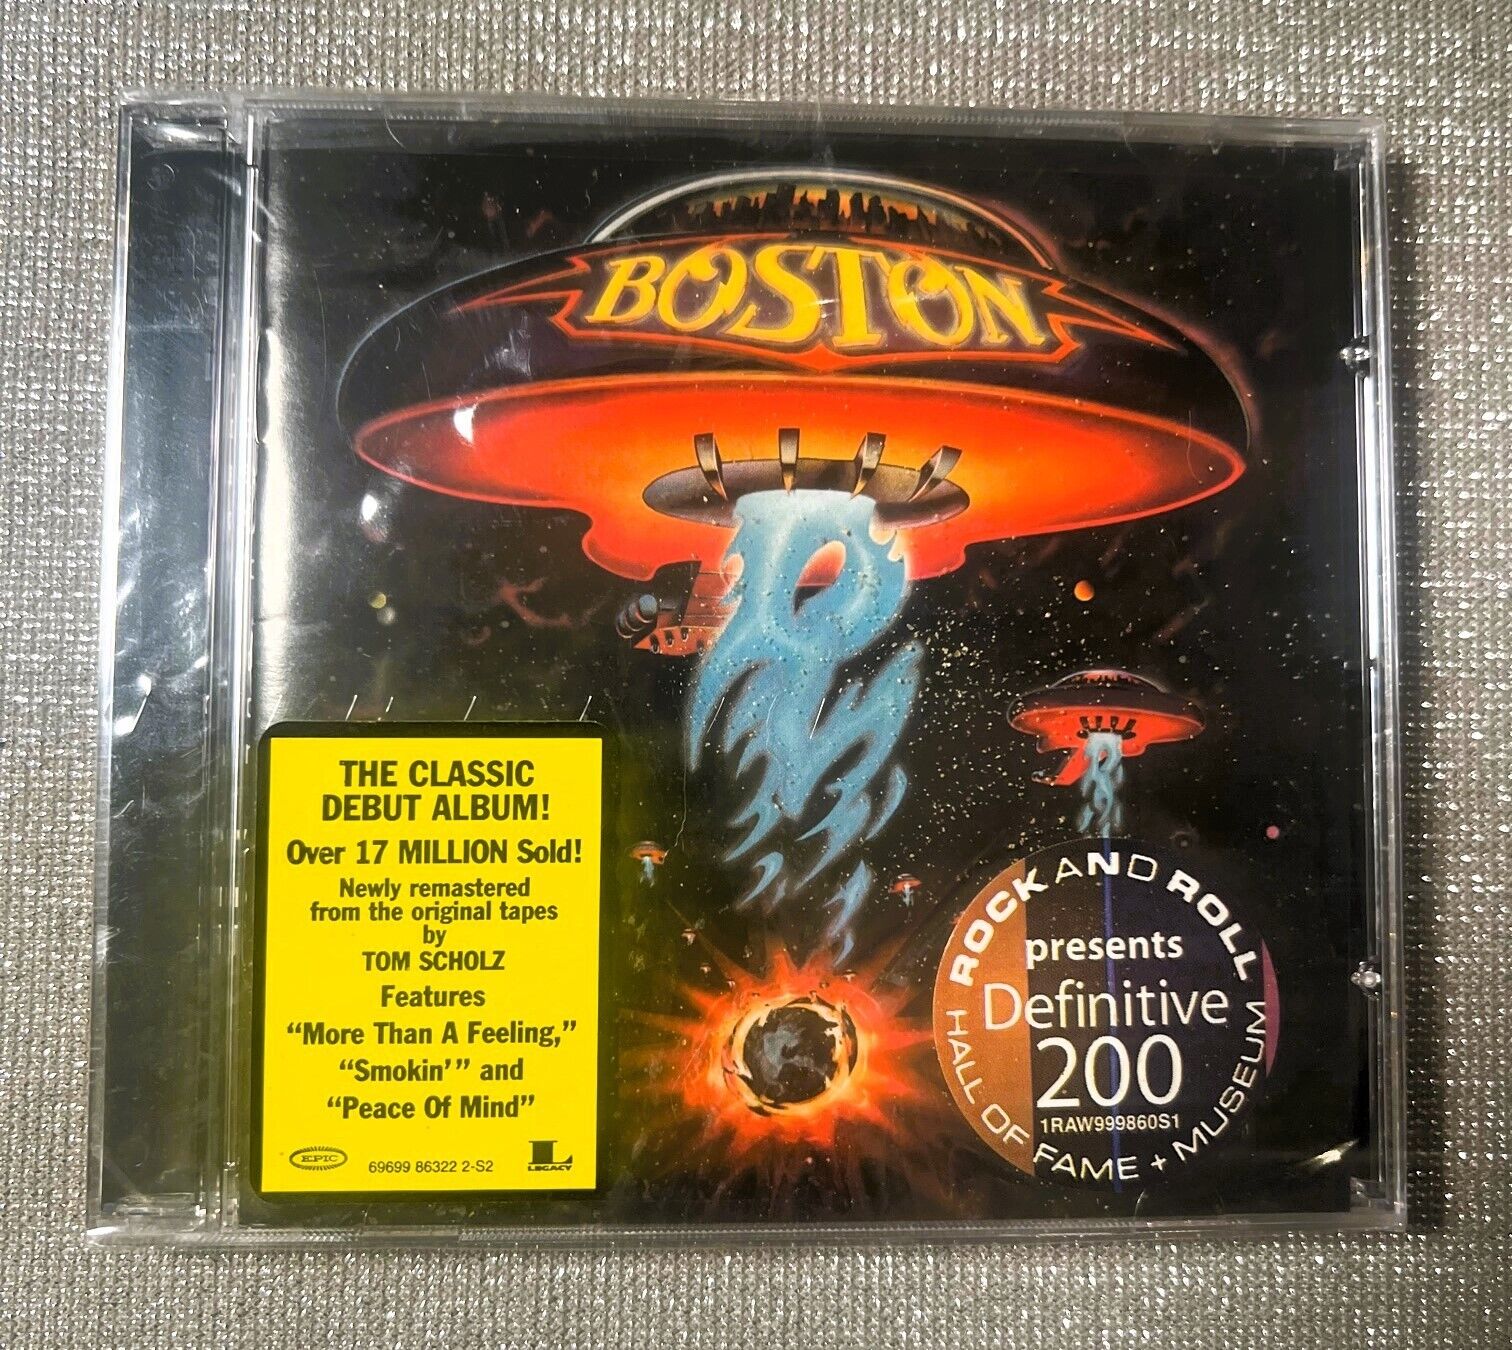 Boston, Classic Debut Album (CD, 2006) Brand NEW UNSEALED More than a Feeling